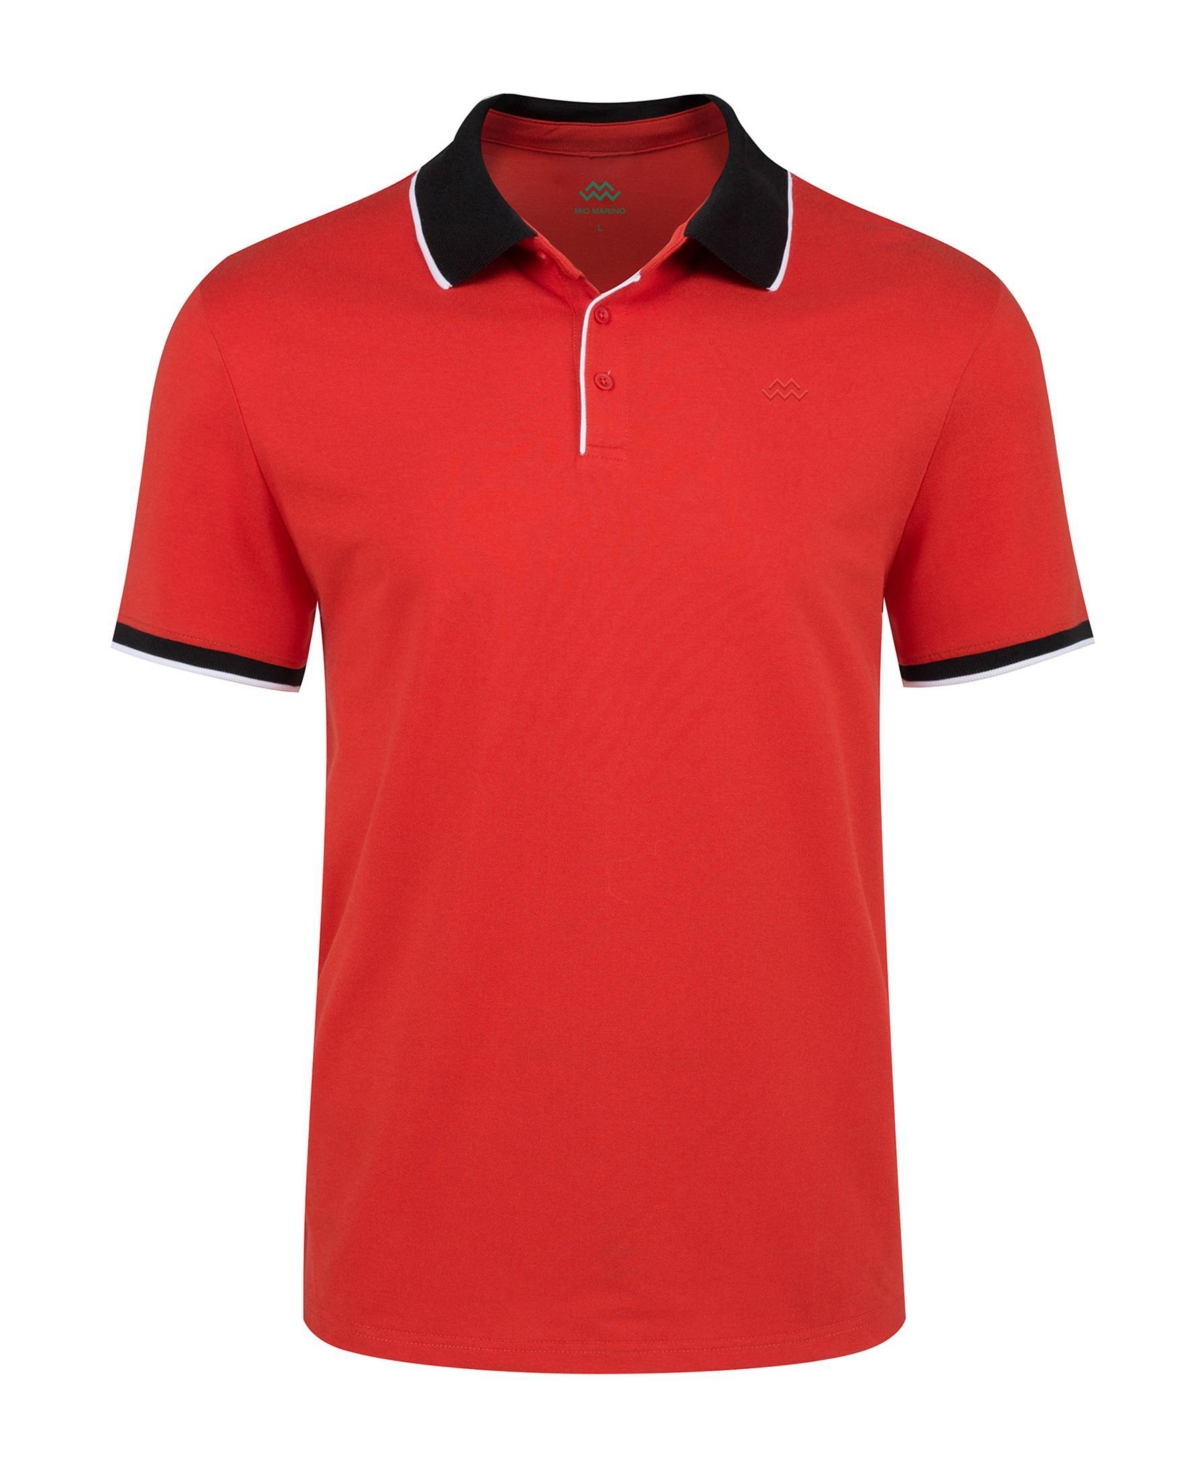 Men's Classic-Fit Cotton-Blend Pique Polo Shirt with Contrast Collar - Red